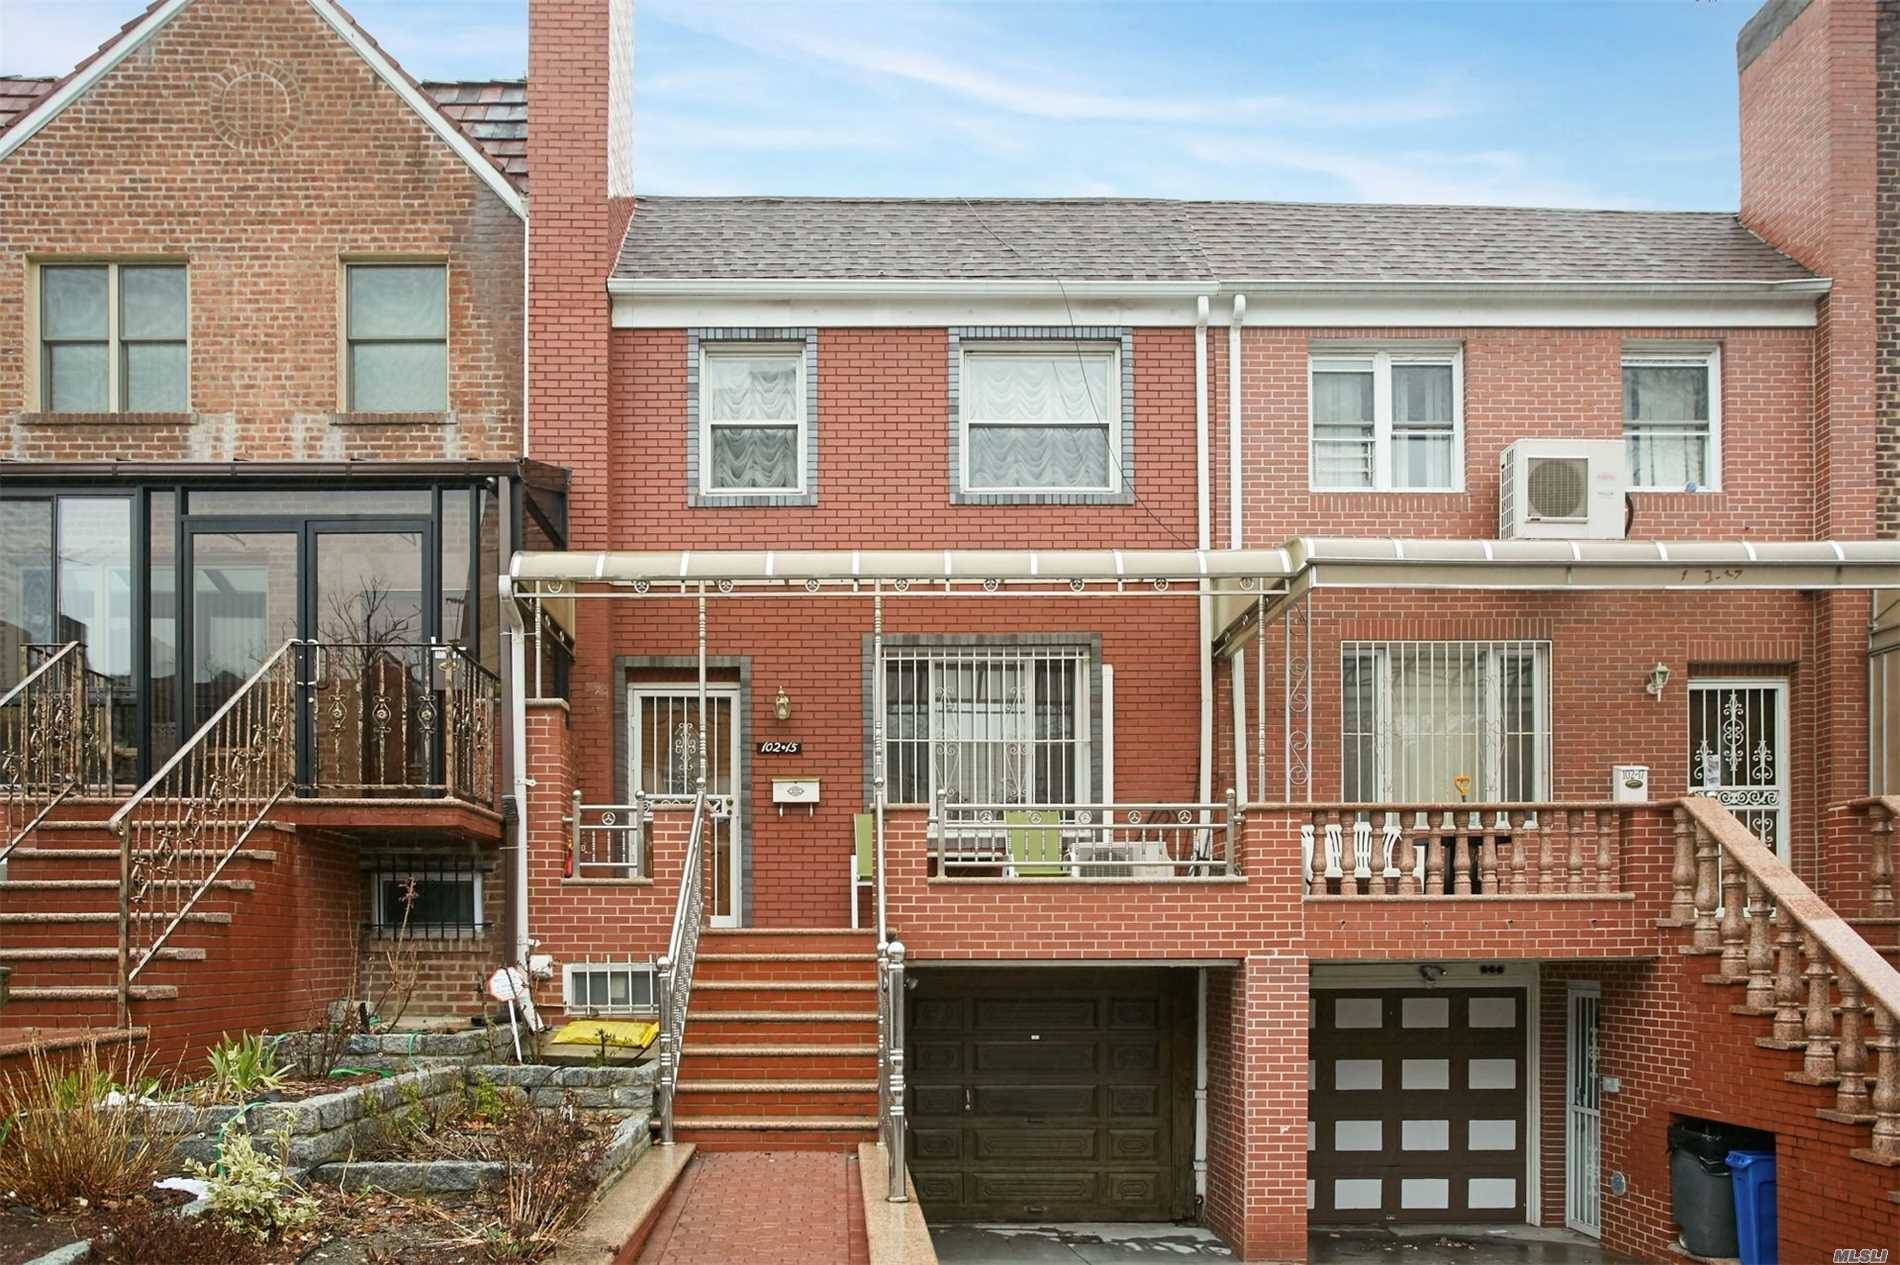 Fully Renovated Brick House In Forest Hills Featuring Large Living Rm,Formal Dining R, With High Ceilings And Hardwood Floors.